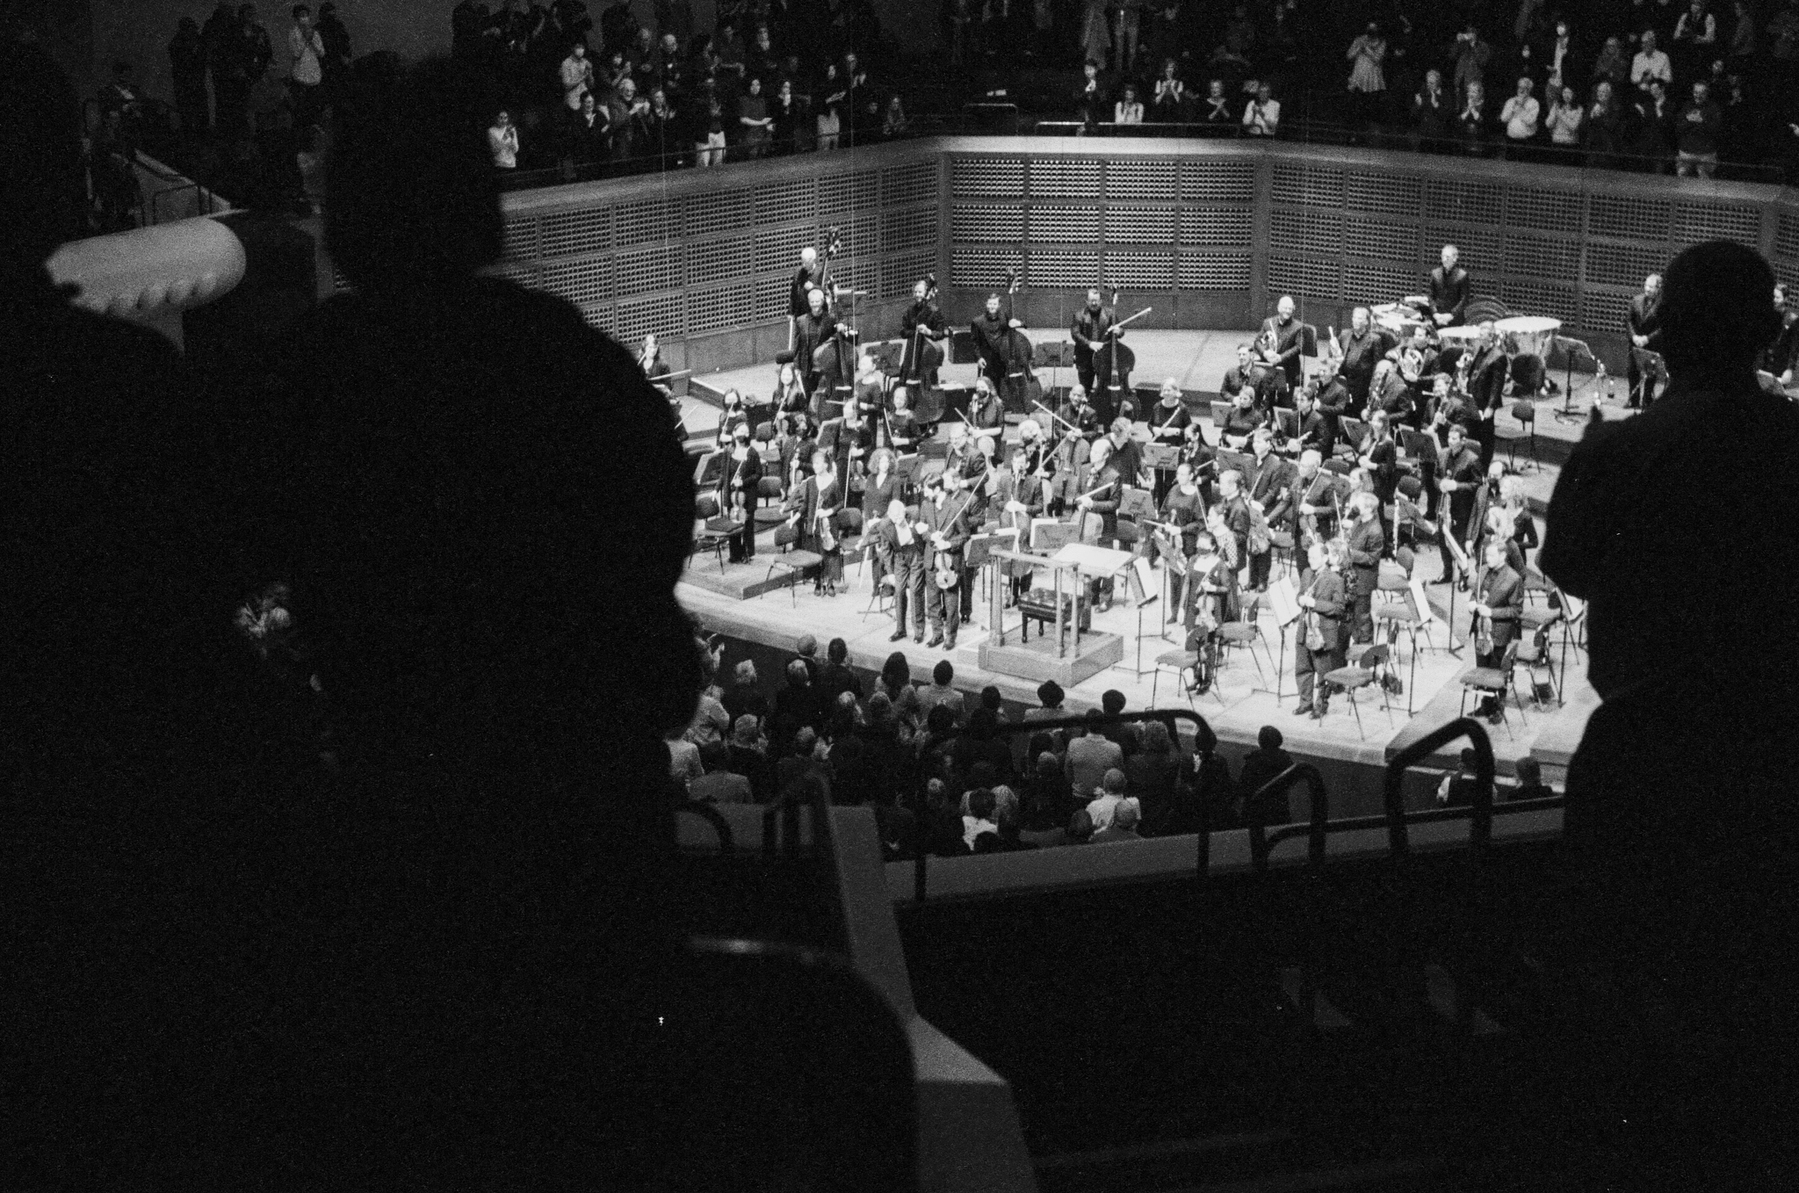 A scan of a black and white photograph of a standing ovation for an orchestra